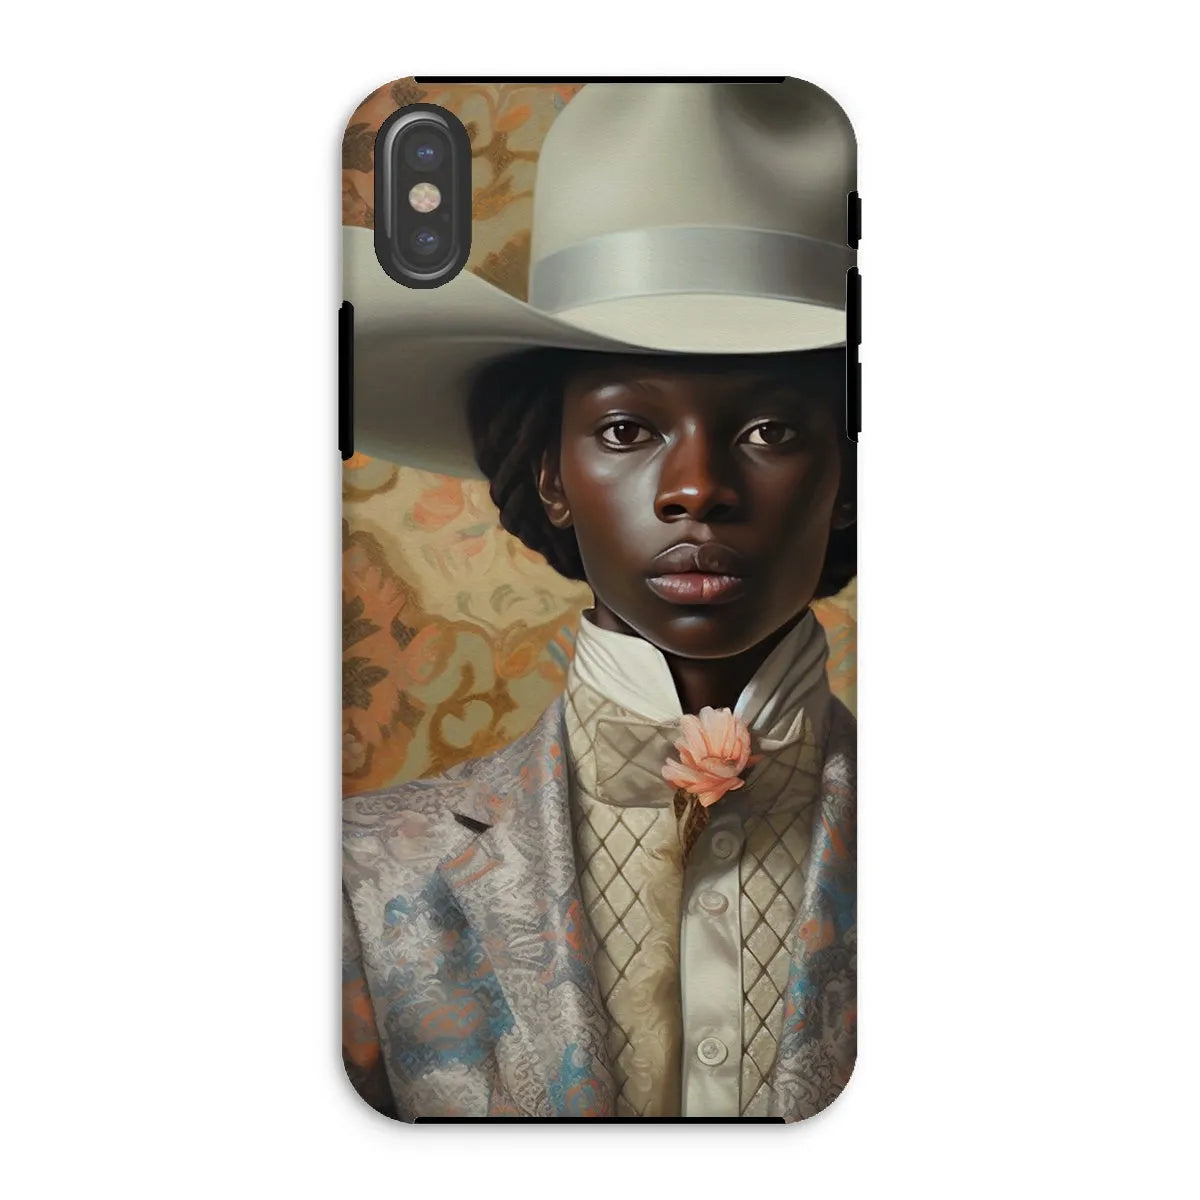 Caesar The Gay Cowboy - Gay Aesthetic Art Phone Case - Iphone Xs / Matte - Mobile Phone Cases - Aesthetic Art